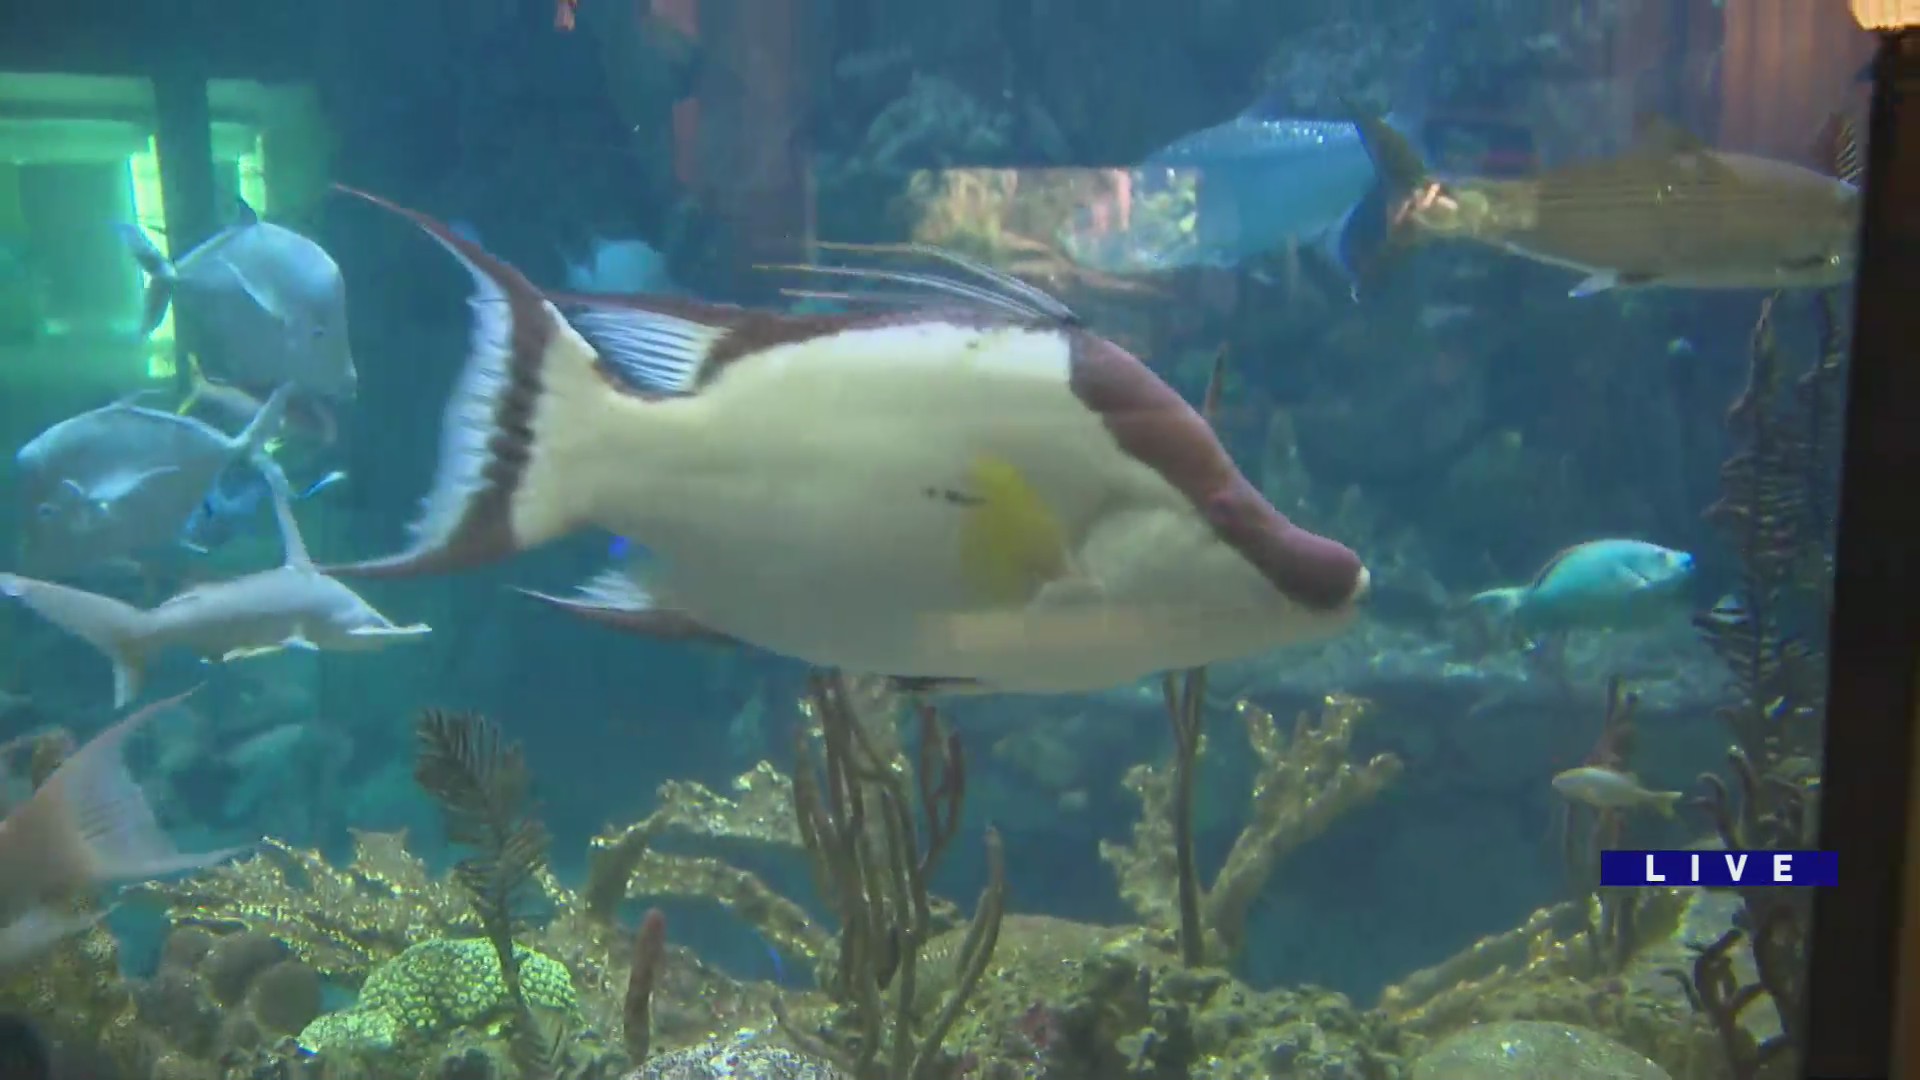 Around Town checks in with the Shedd Aquarium